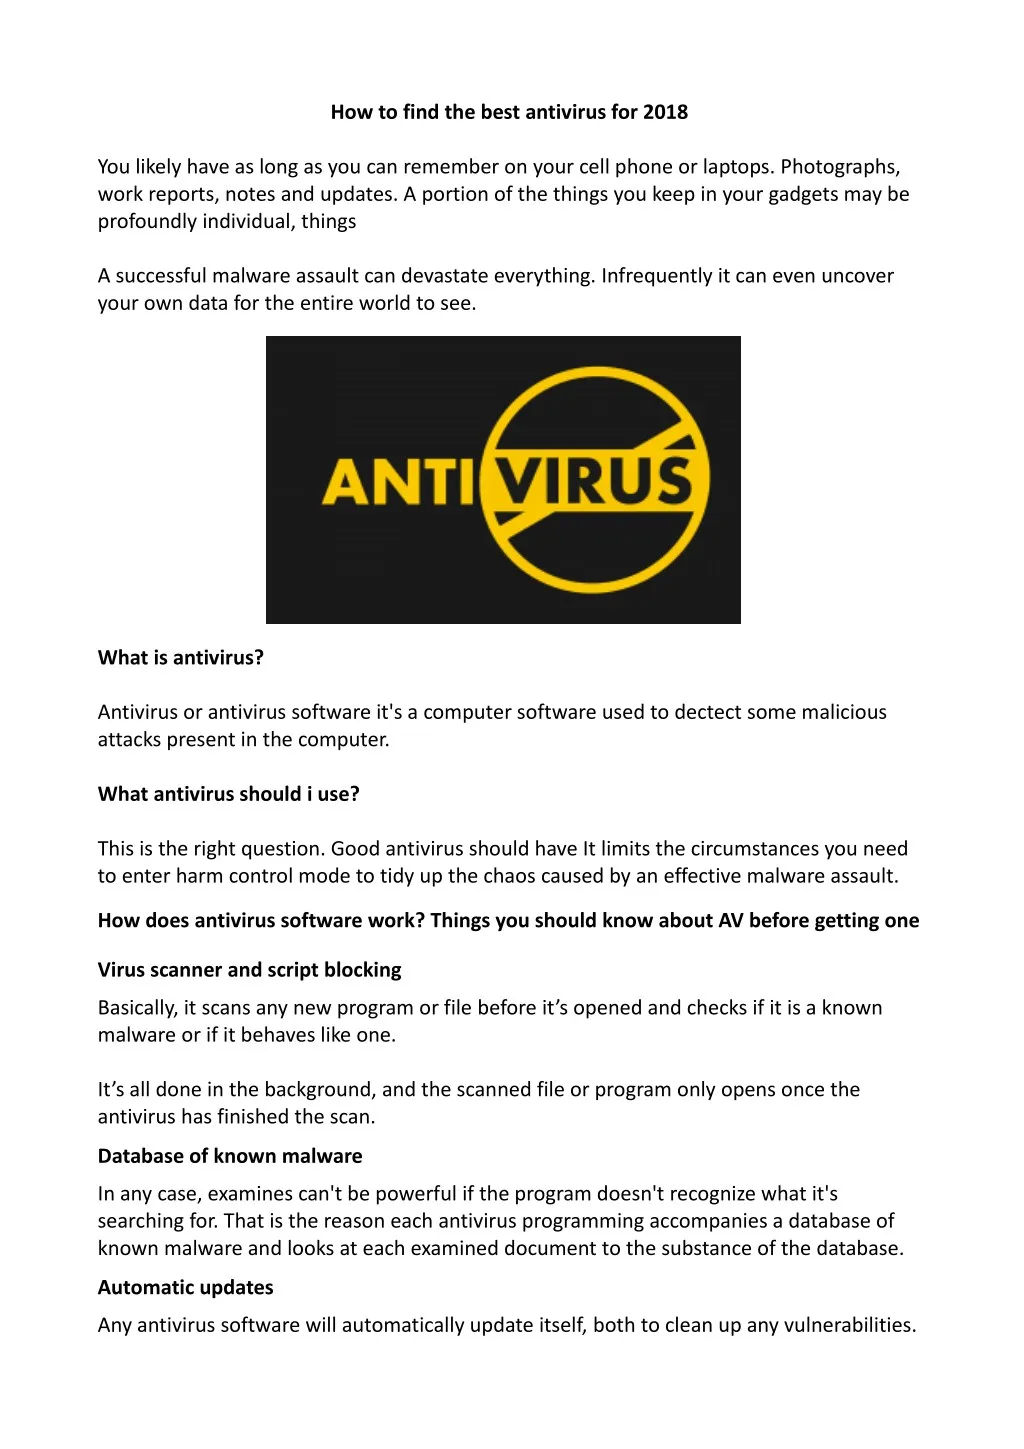 how to find the best antivirus for 2018